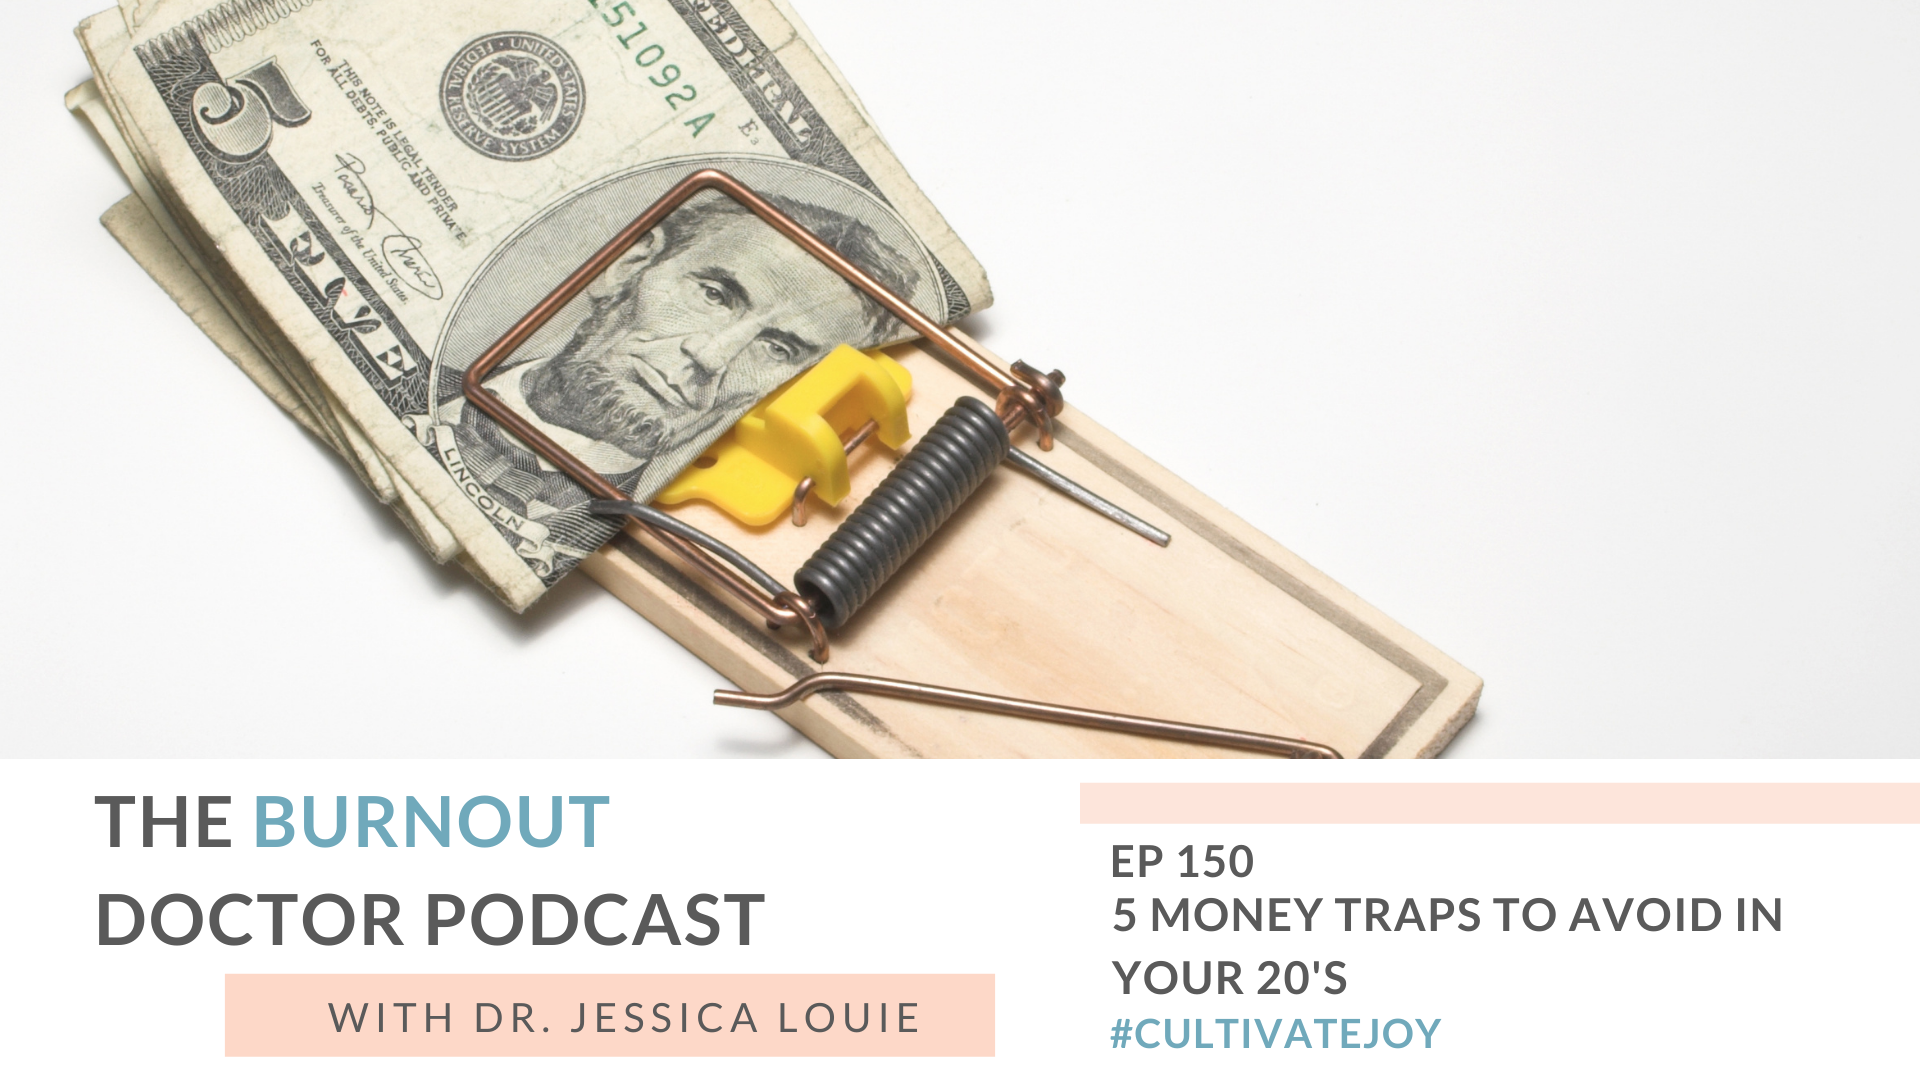 5 money traps to avoid in twenties. financial goals in early life. kakeibo method. Debt free pharmacist. FAT FIRE Dr. Jessica Louie